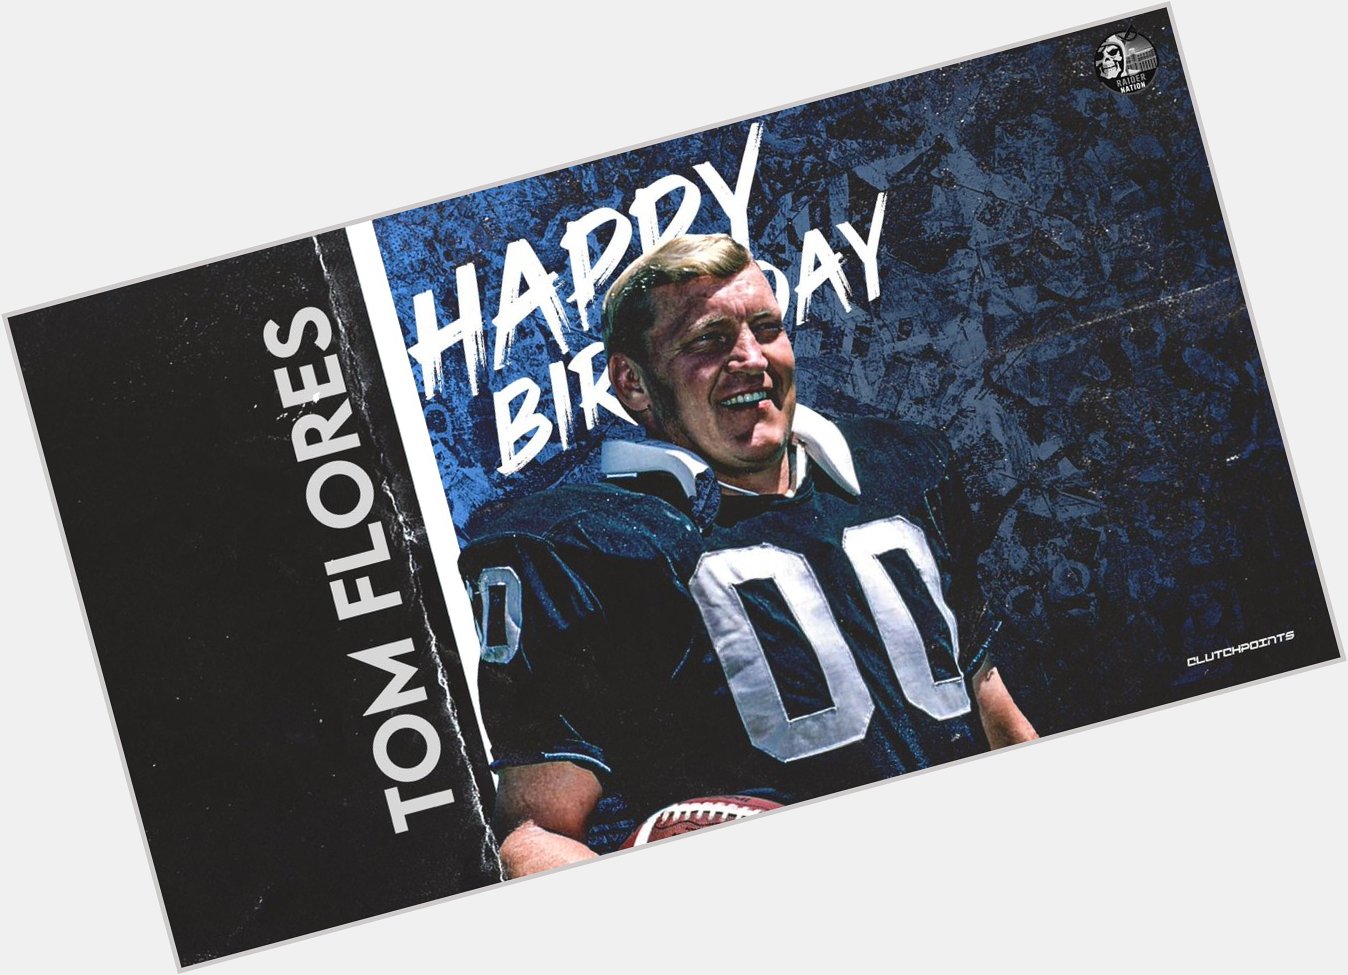 Join us in greeting the legendary Hall of Famer, Tom Flores, a happy birthday! 